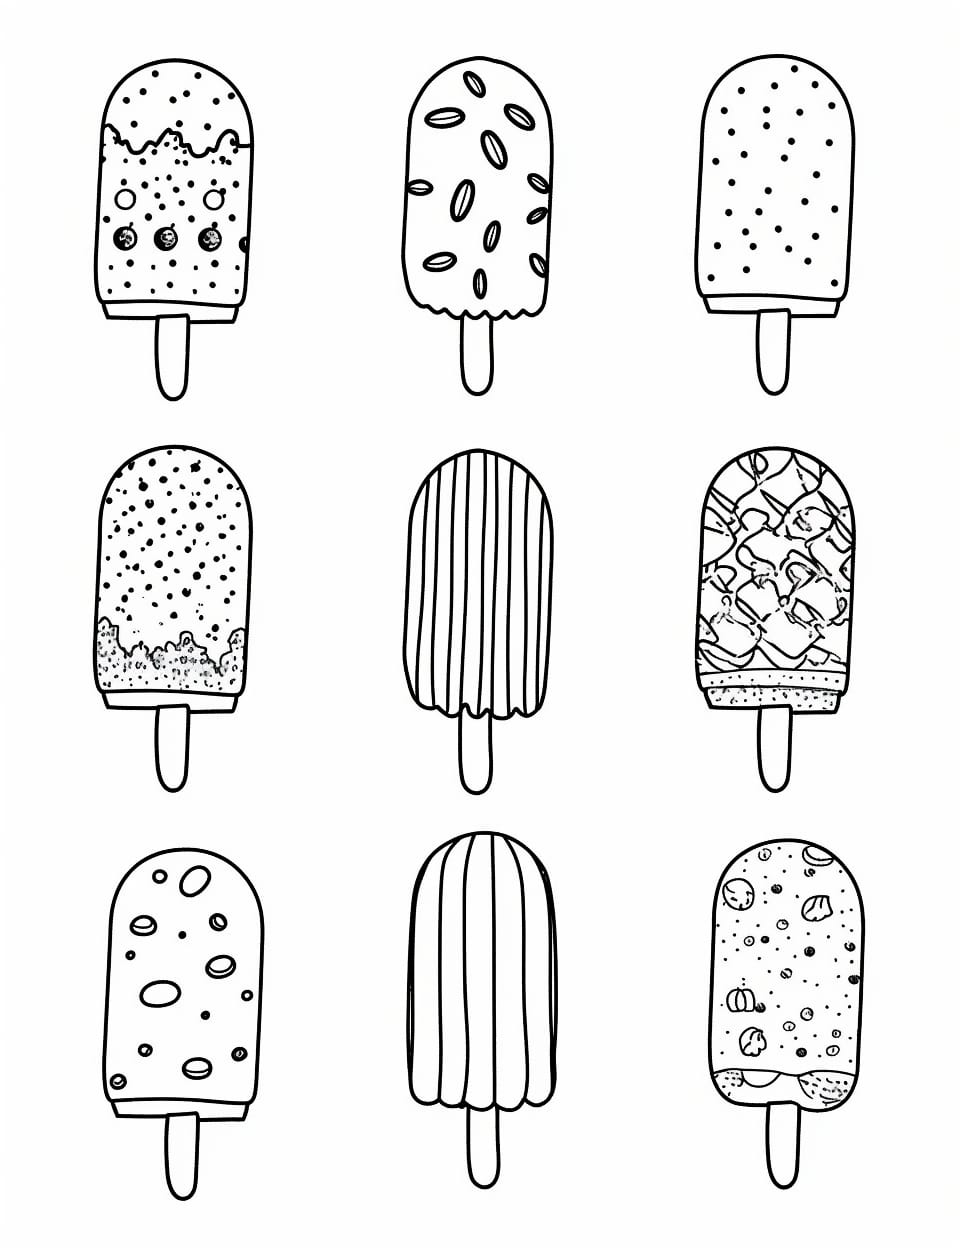 Yummy ice cream coloring pages for kids and adults